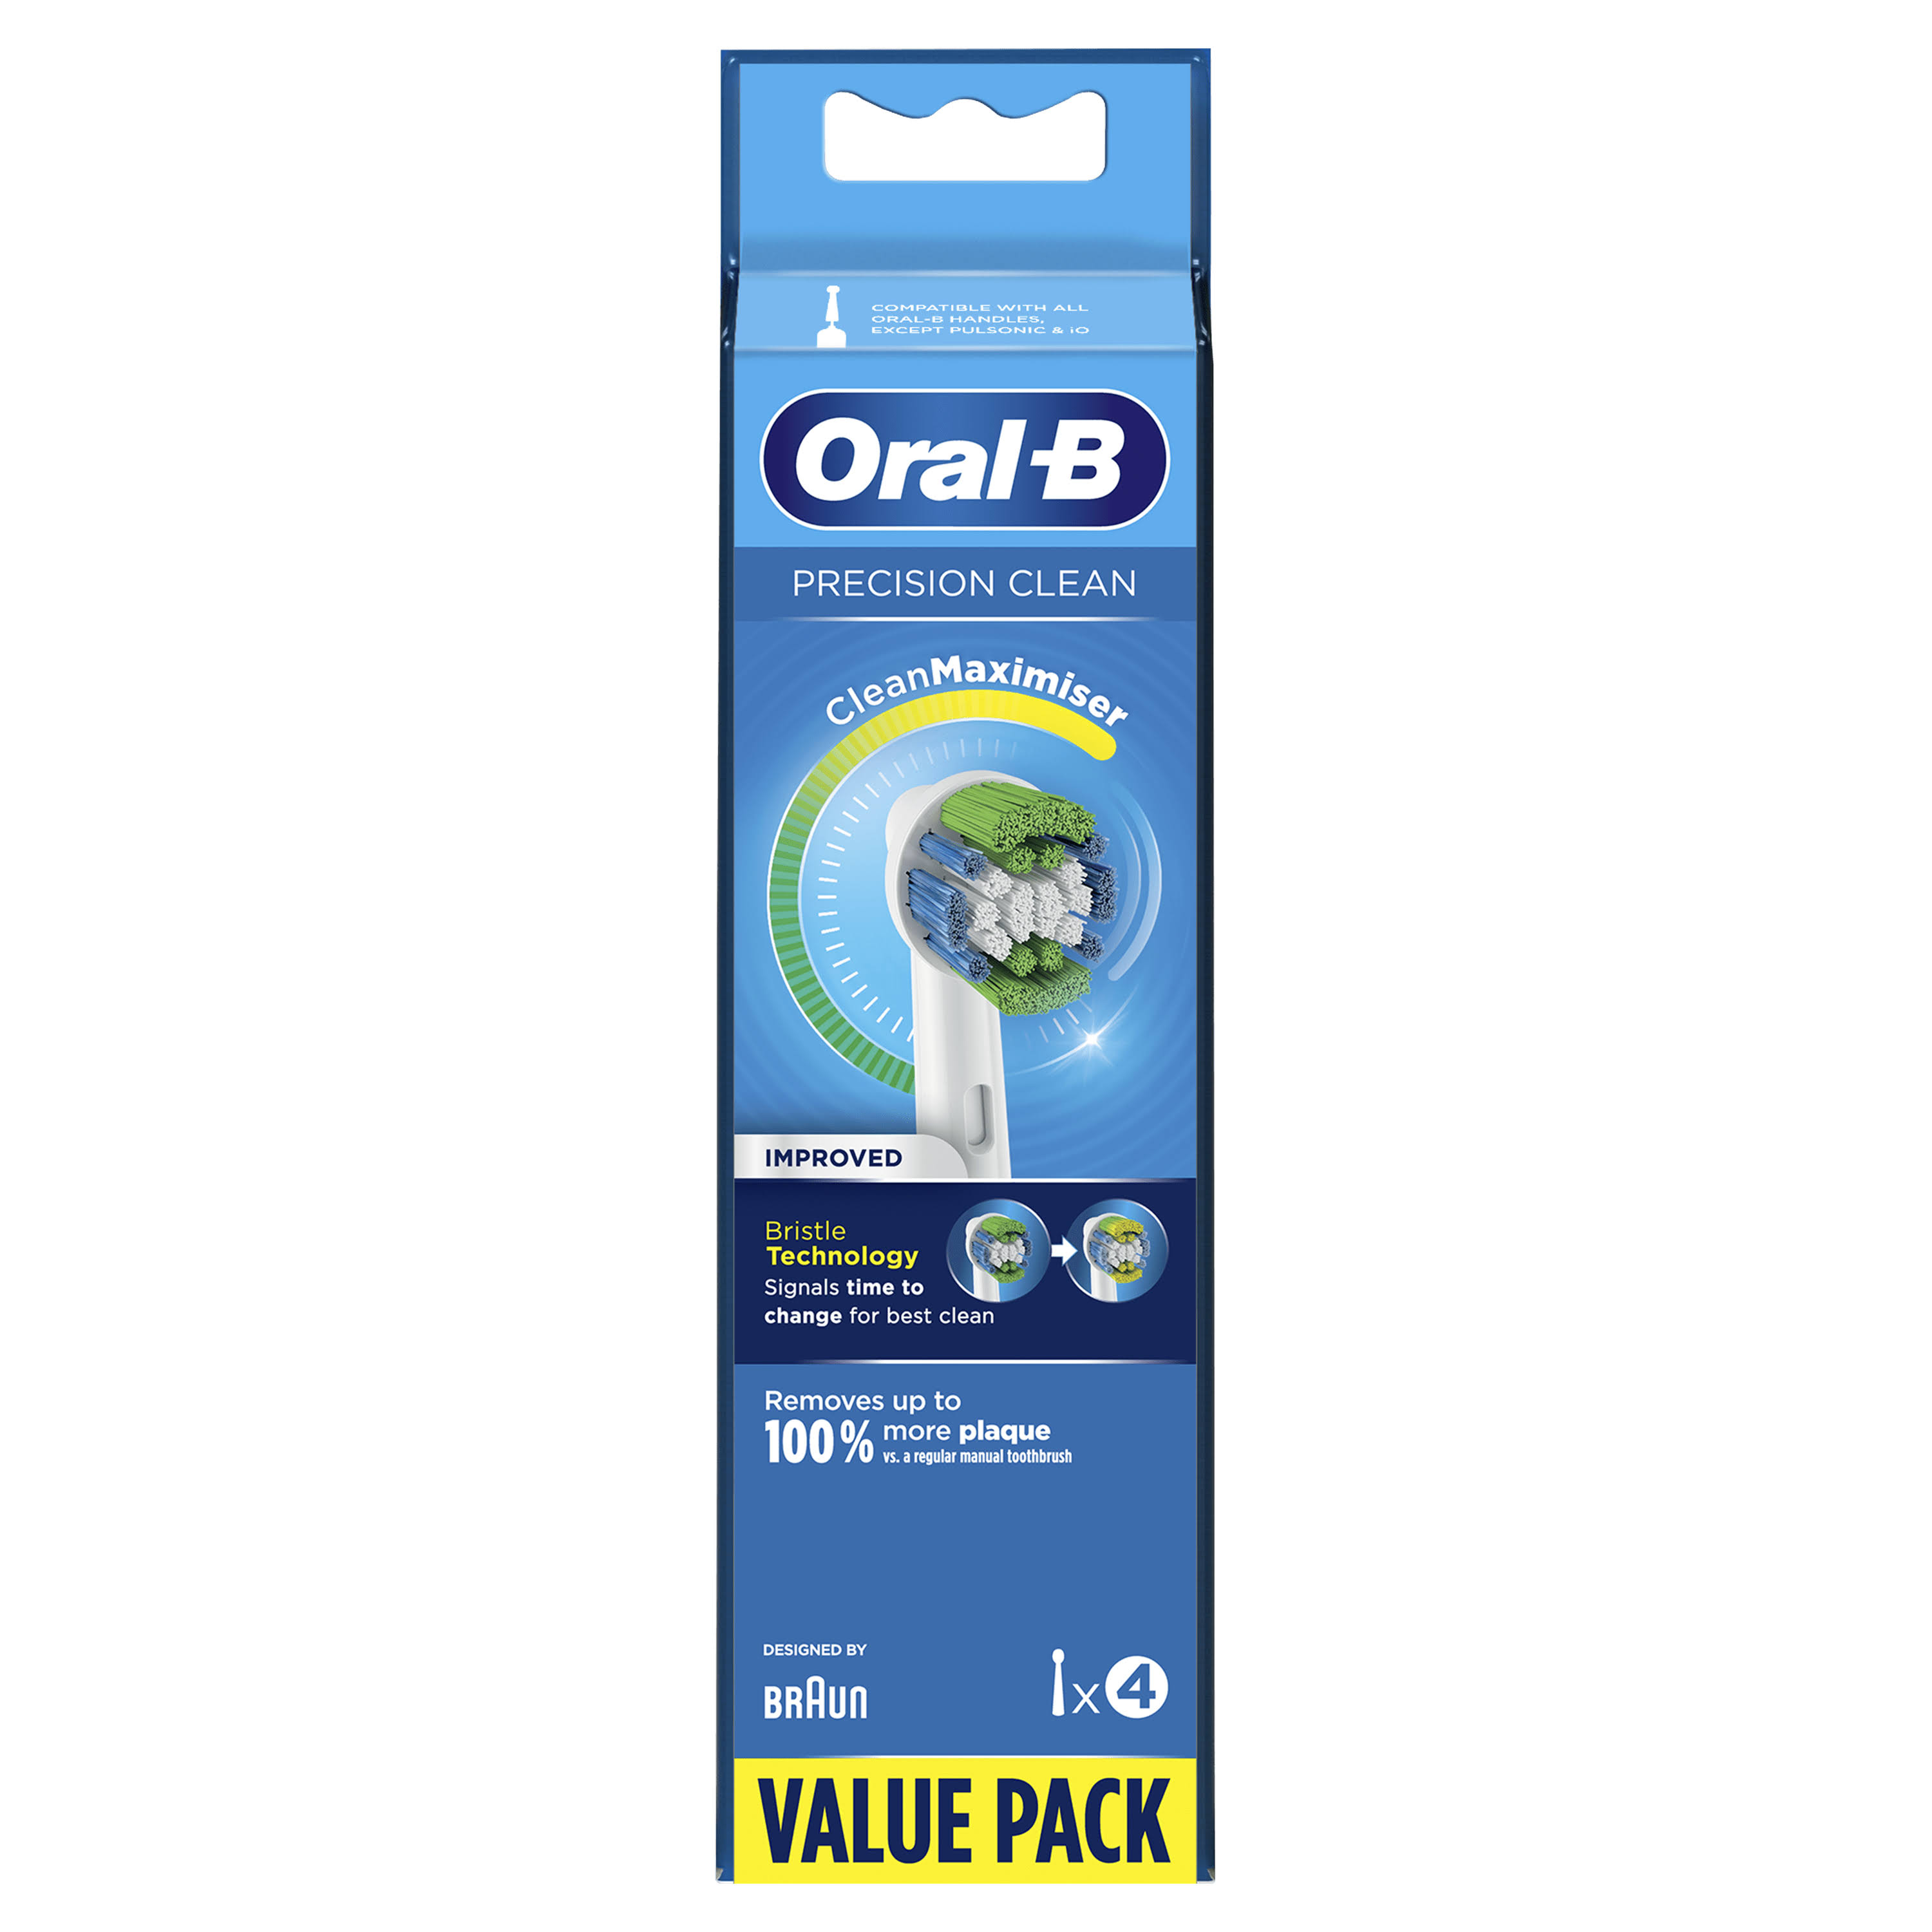 Oral-B Precision Clean Replacement Heads with CleanMaximiser Technology